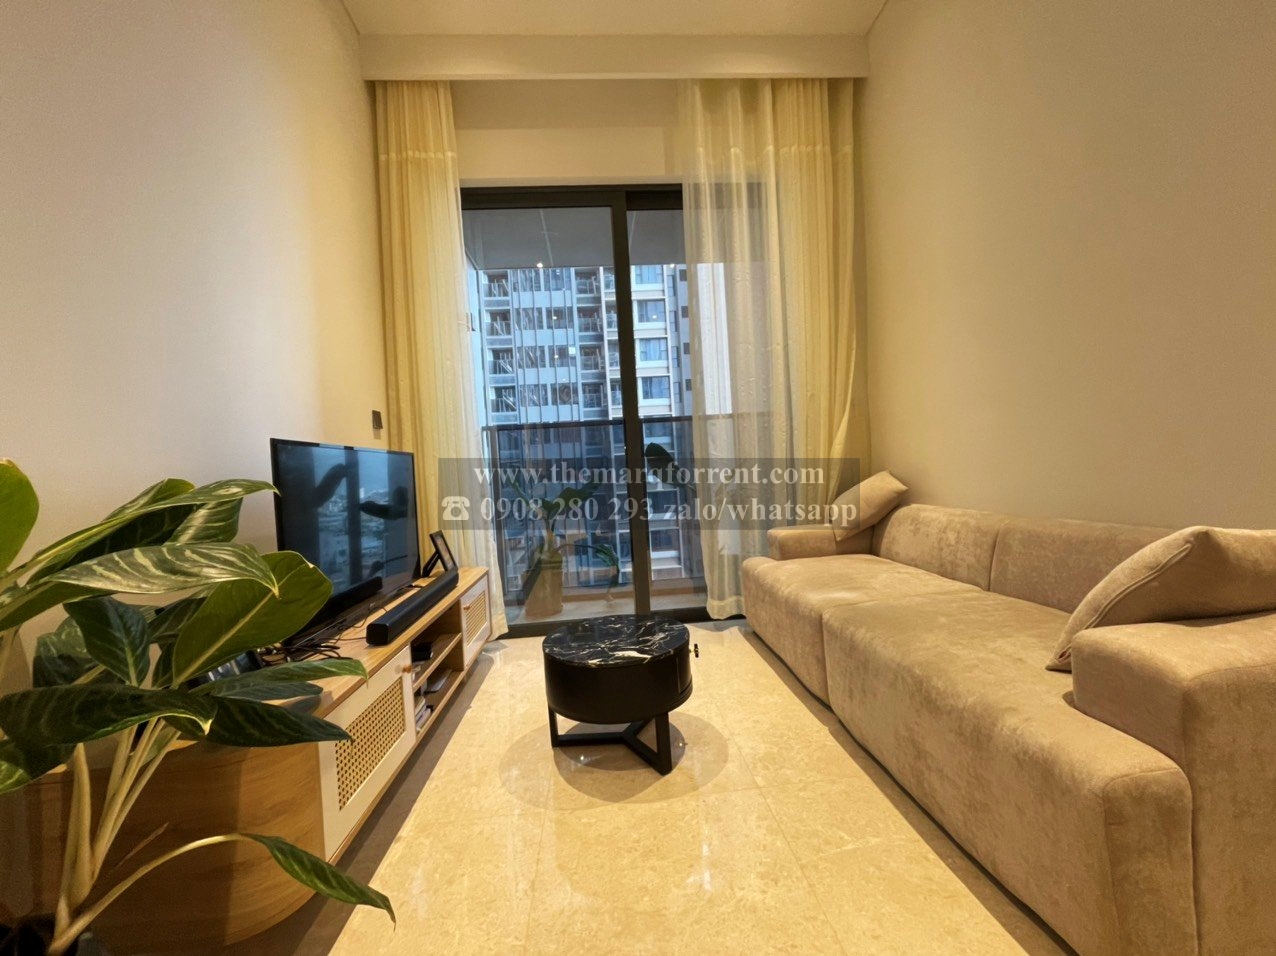 Fully-furnished 1 bedroom apartment in The Marq for rent